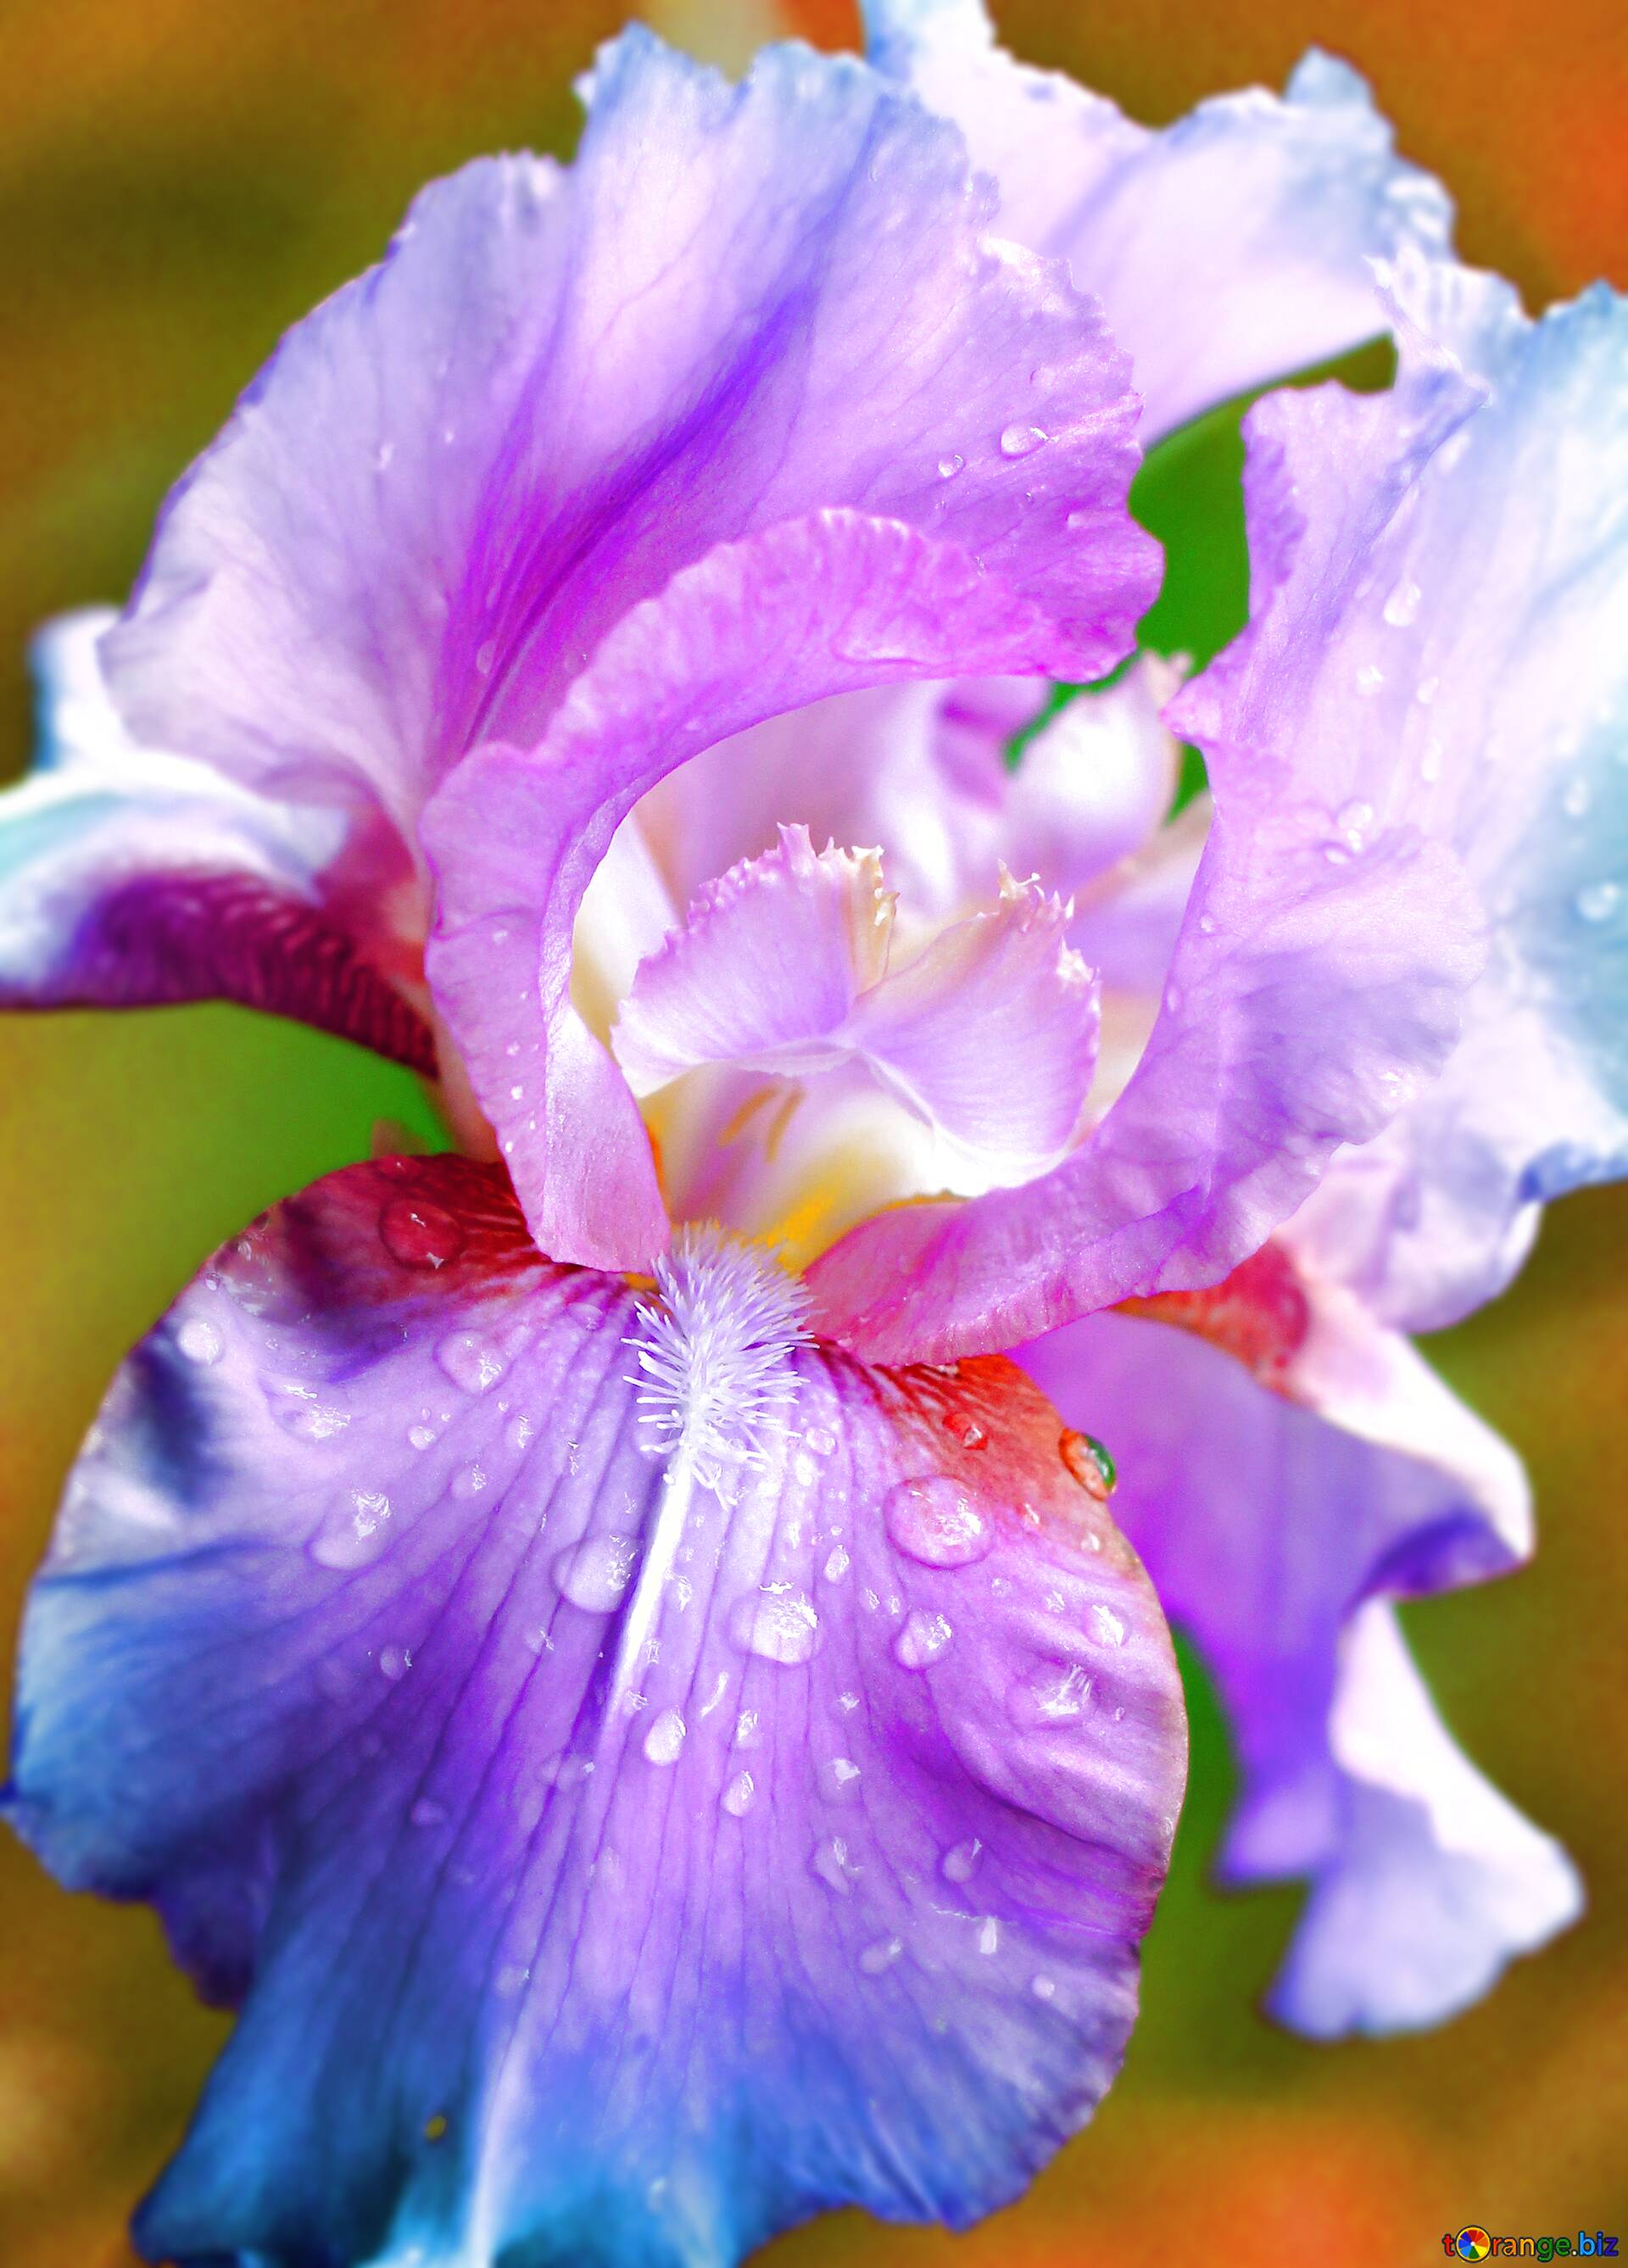 Download free picture Iris flower on CC-BY License ~ Free Image Stock